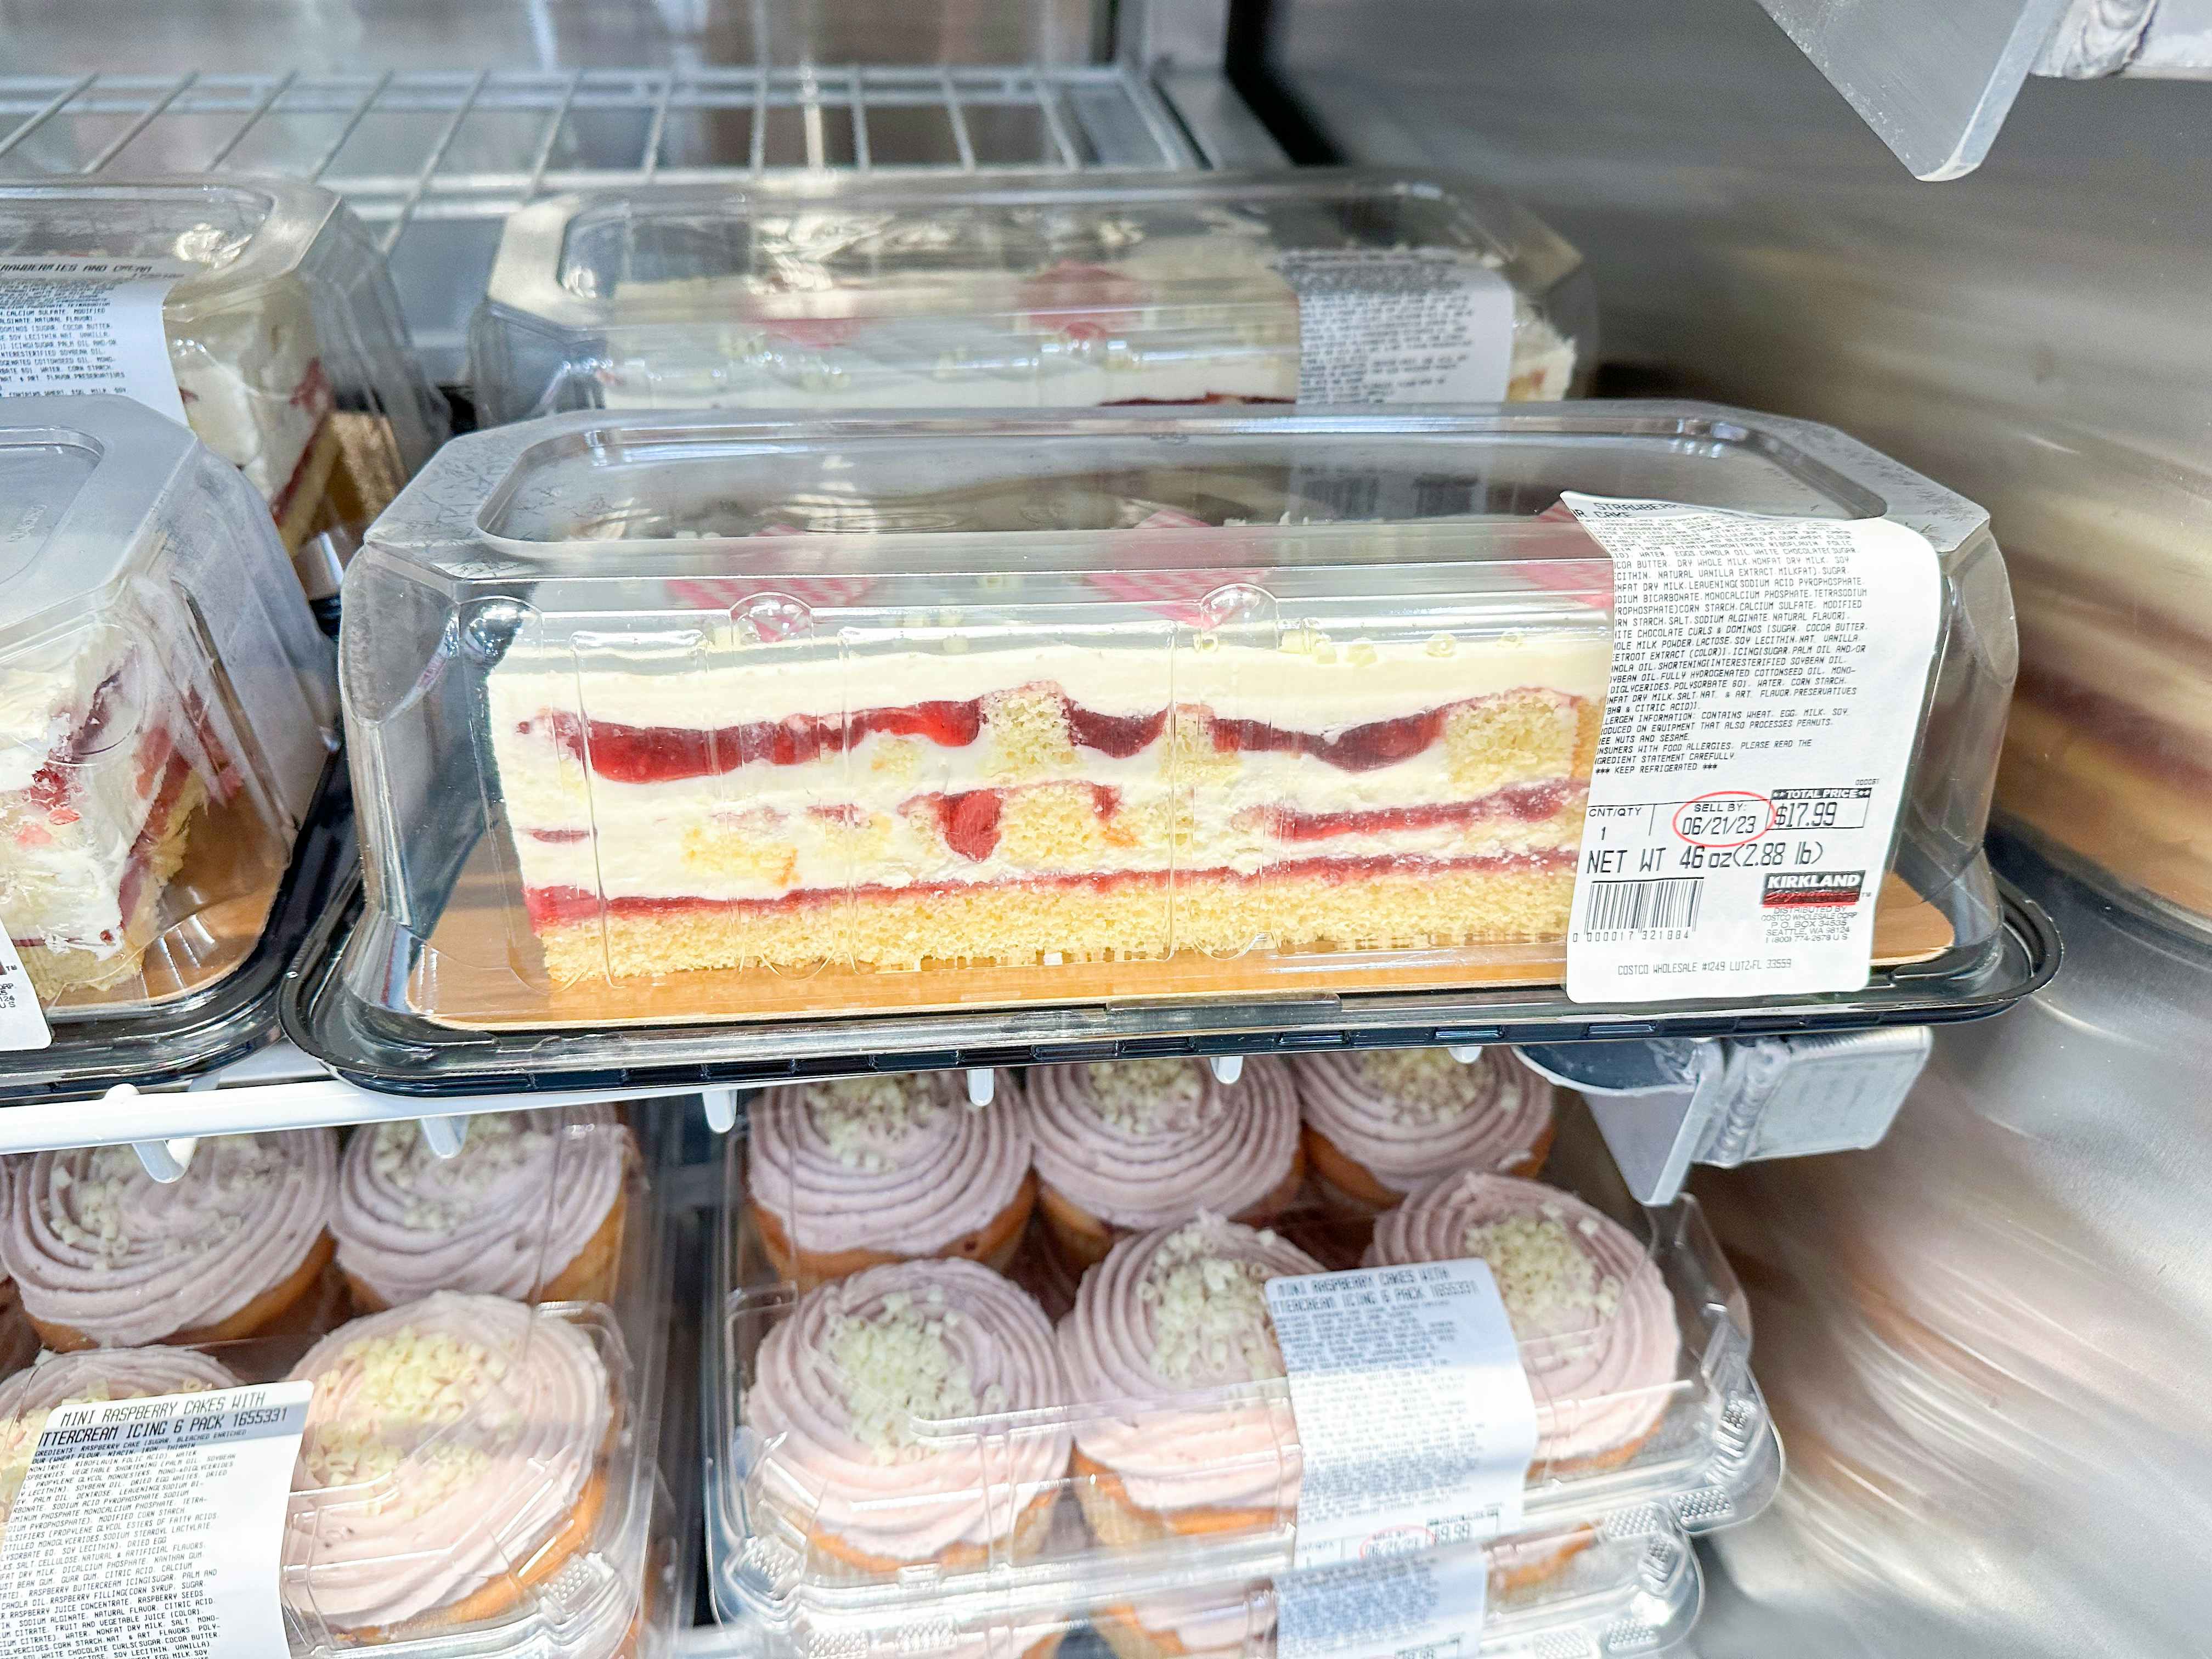 Strawberry and Cream cake from costco in a clear container